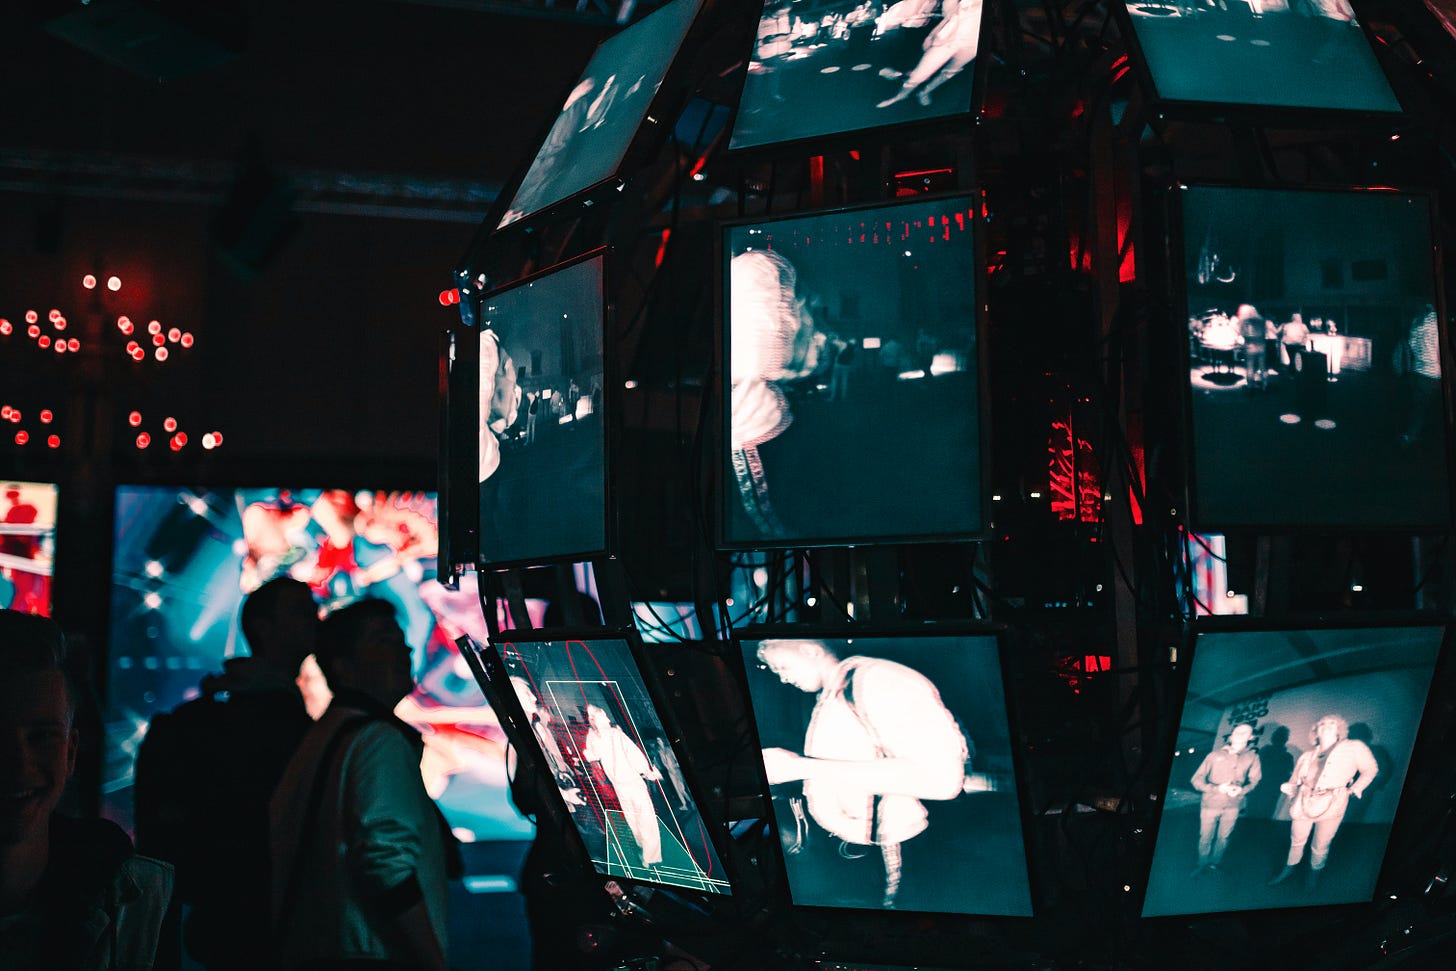 TV screens displaying people as part of an art installation